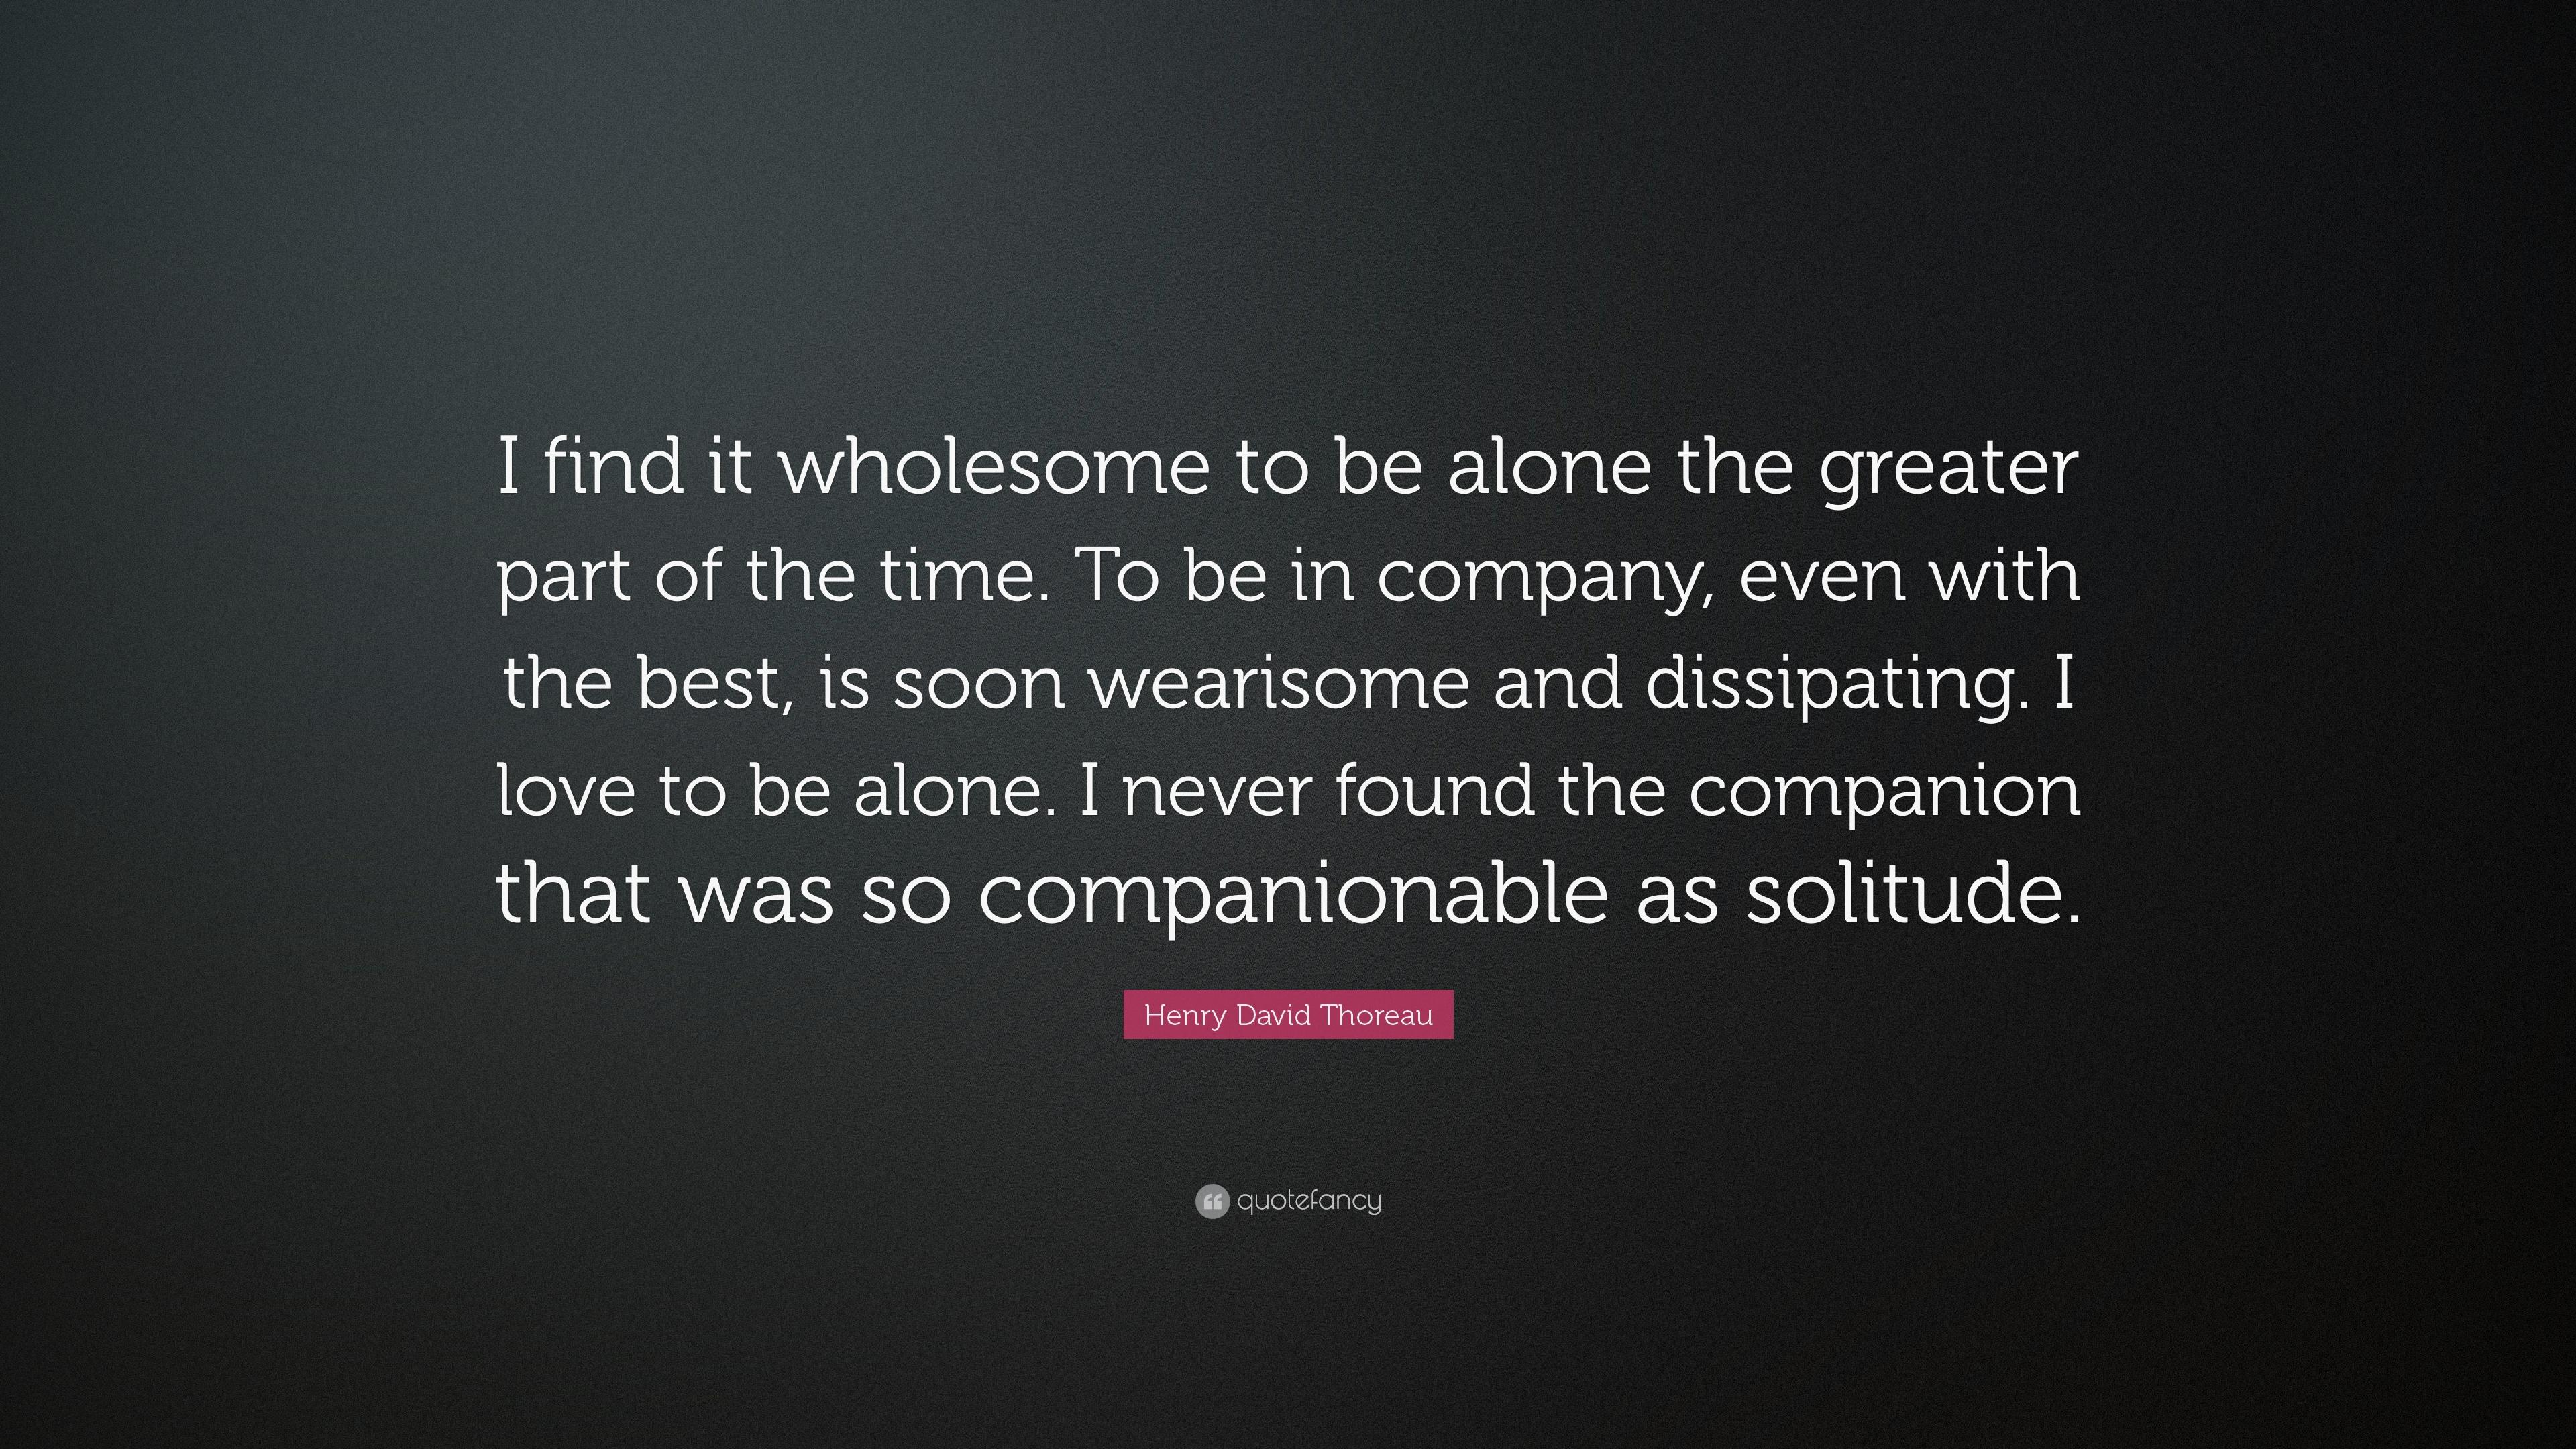 Henry David Thoreau Quote: “I find it wholesome to be alone